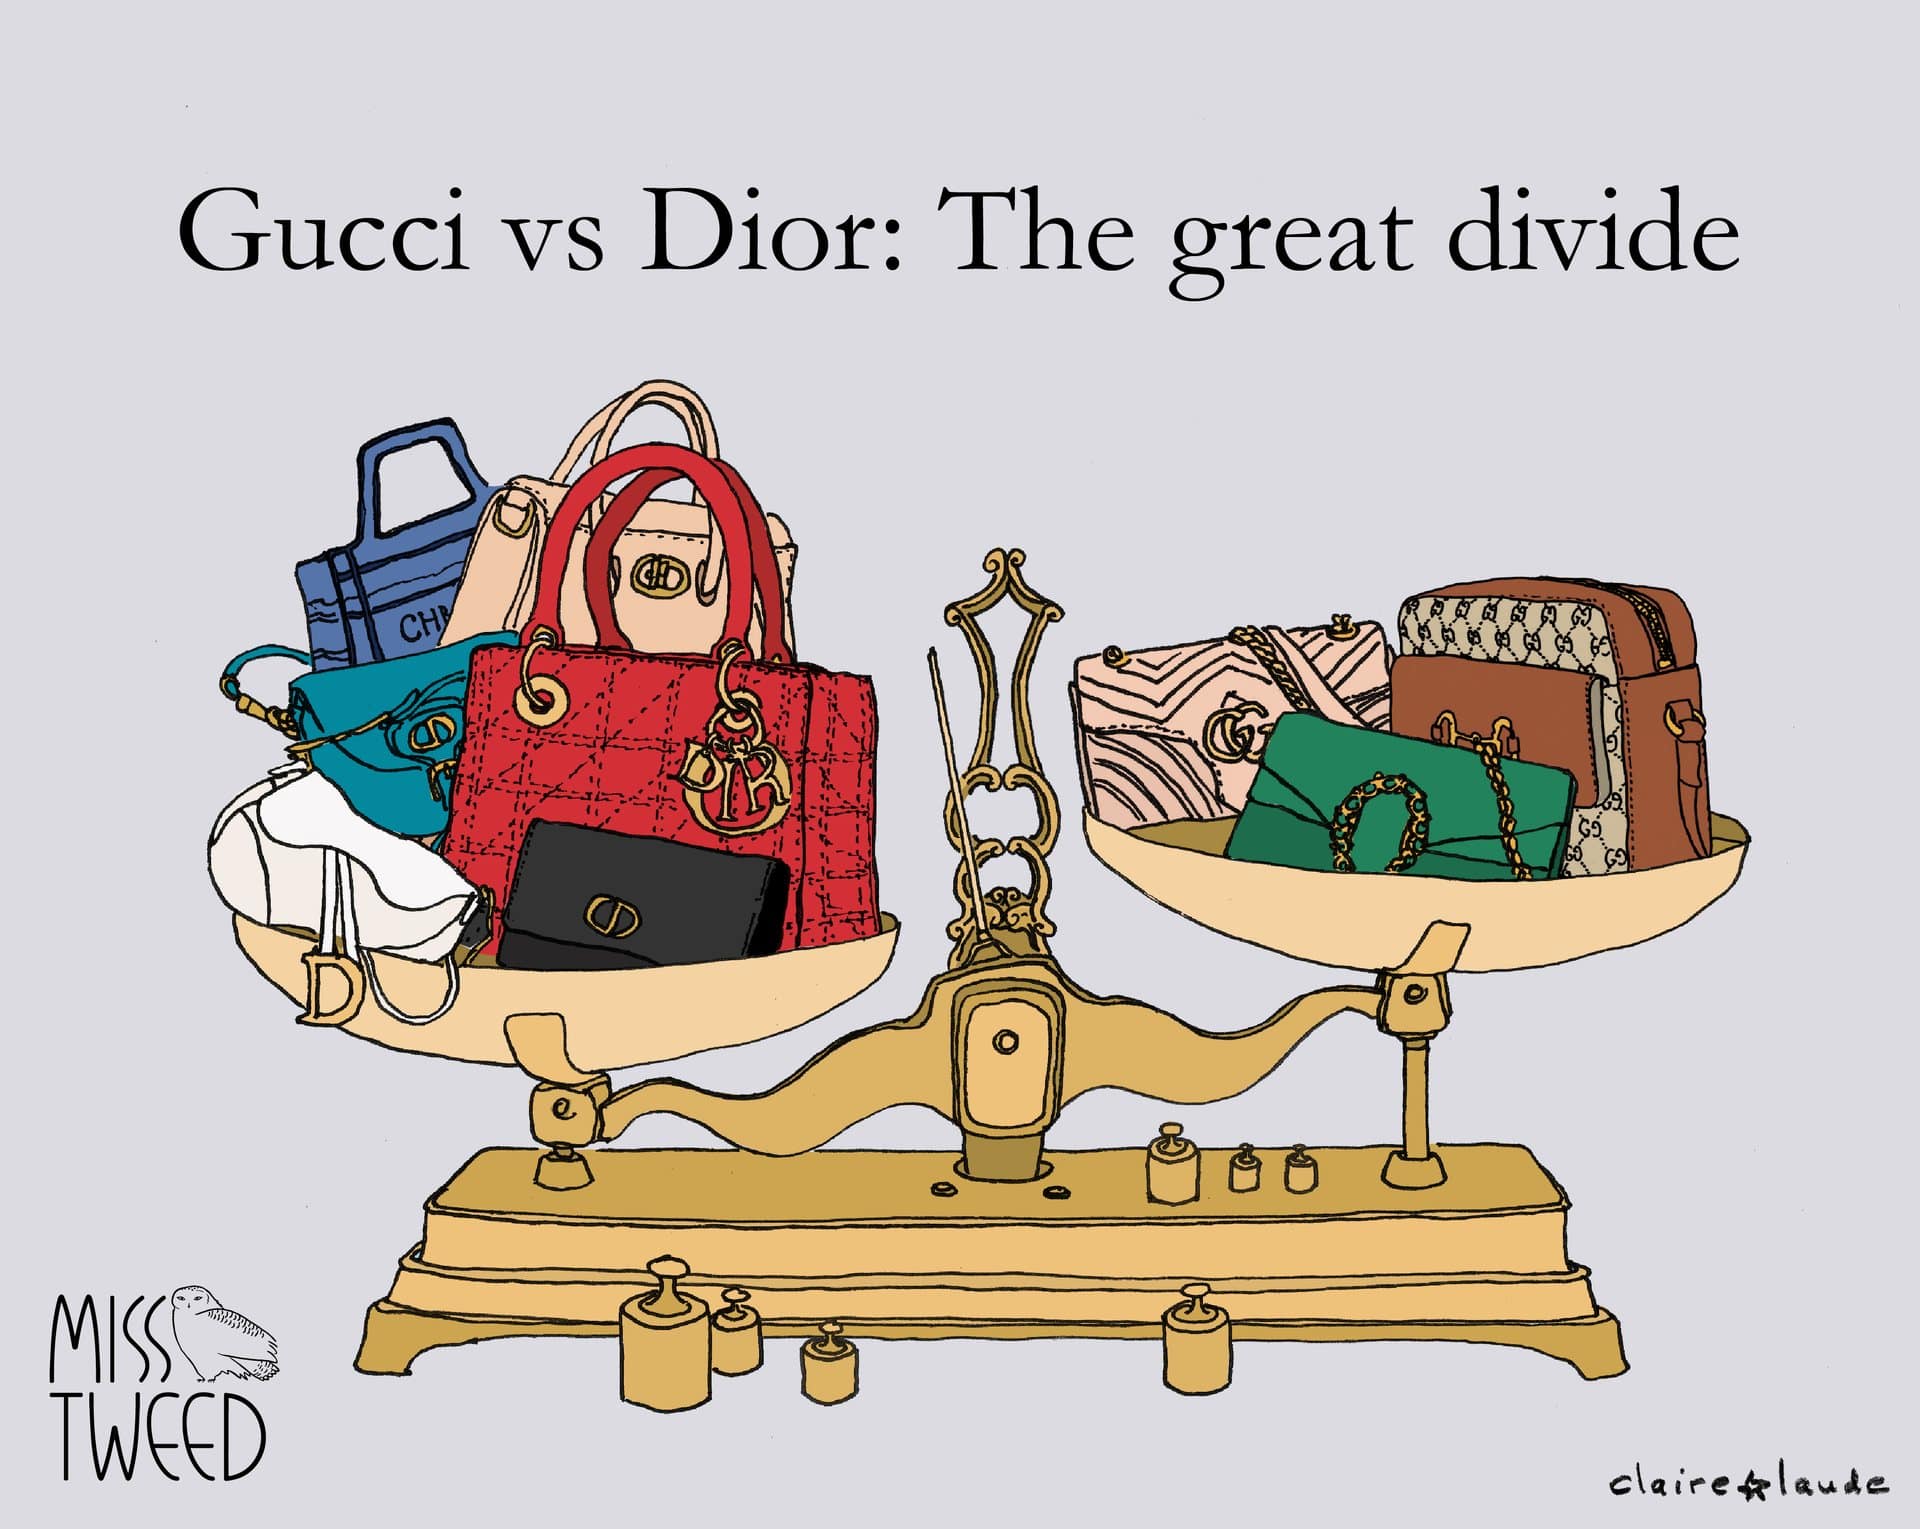 Dior grabs market share from Gucci - but for how long?  